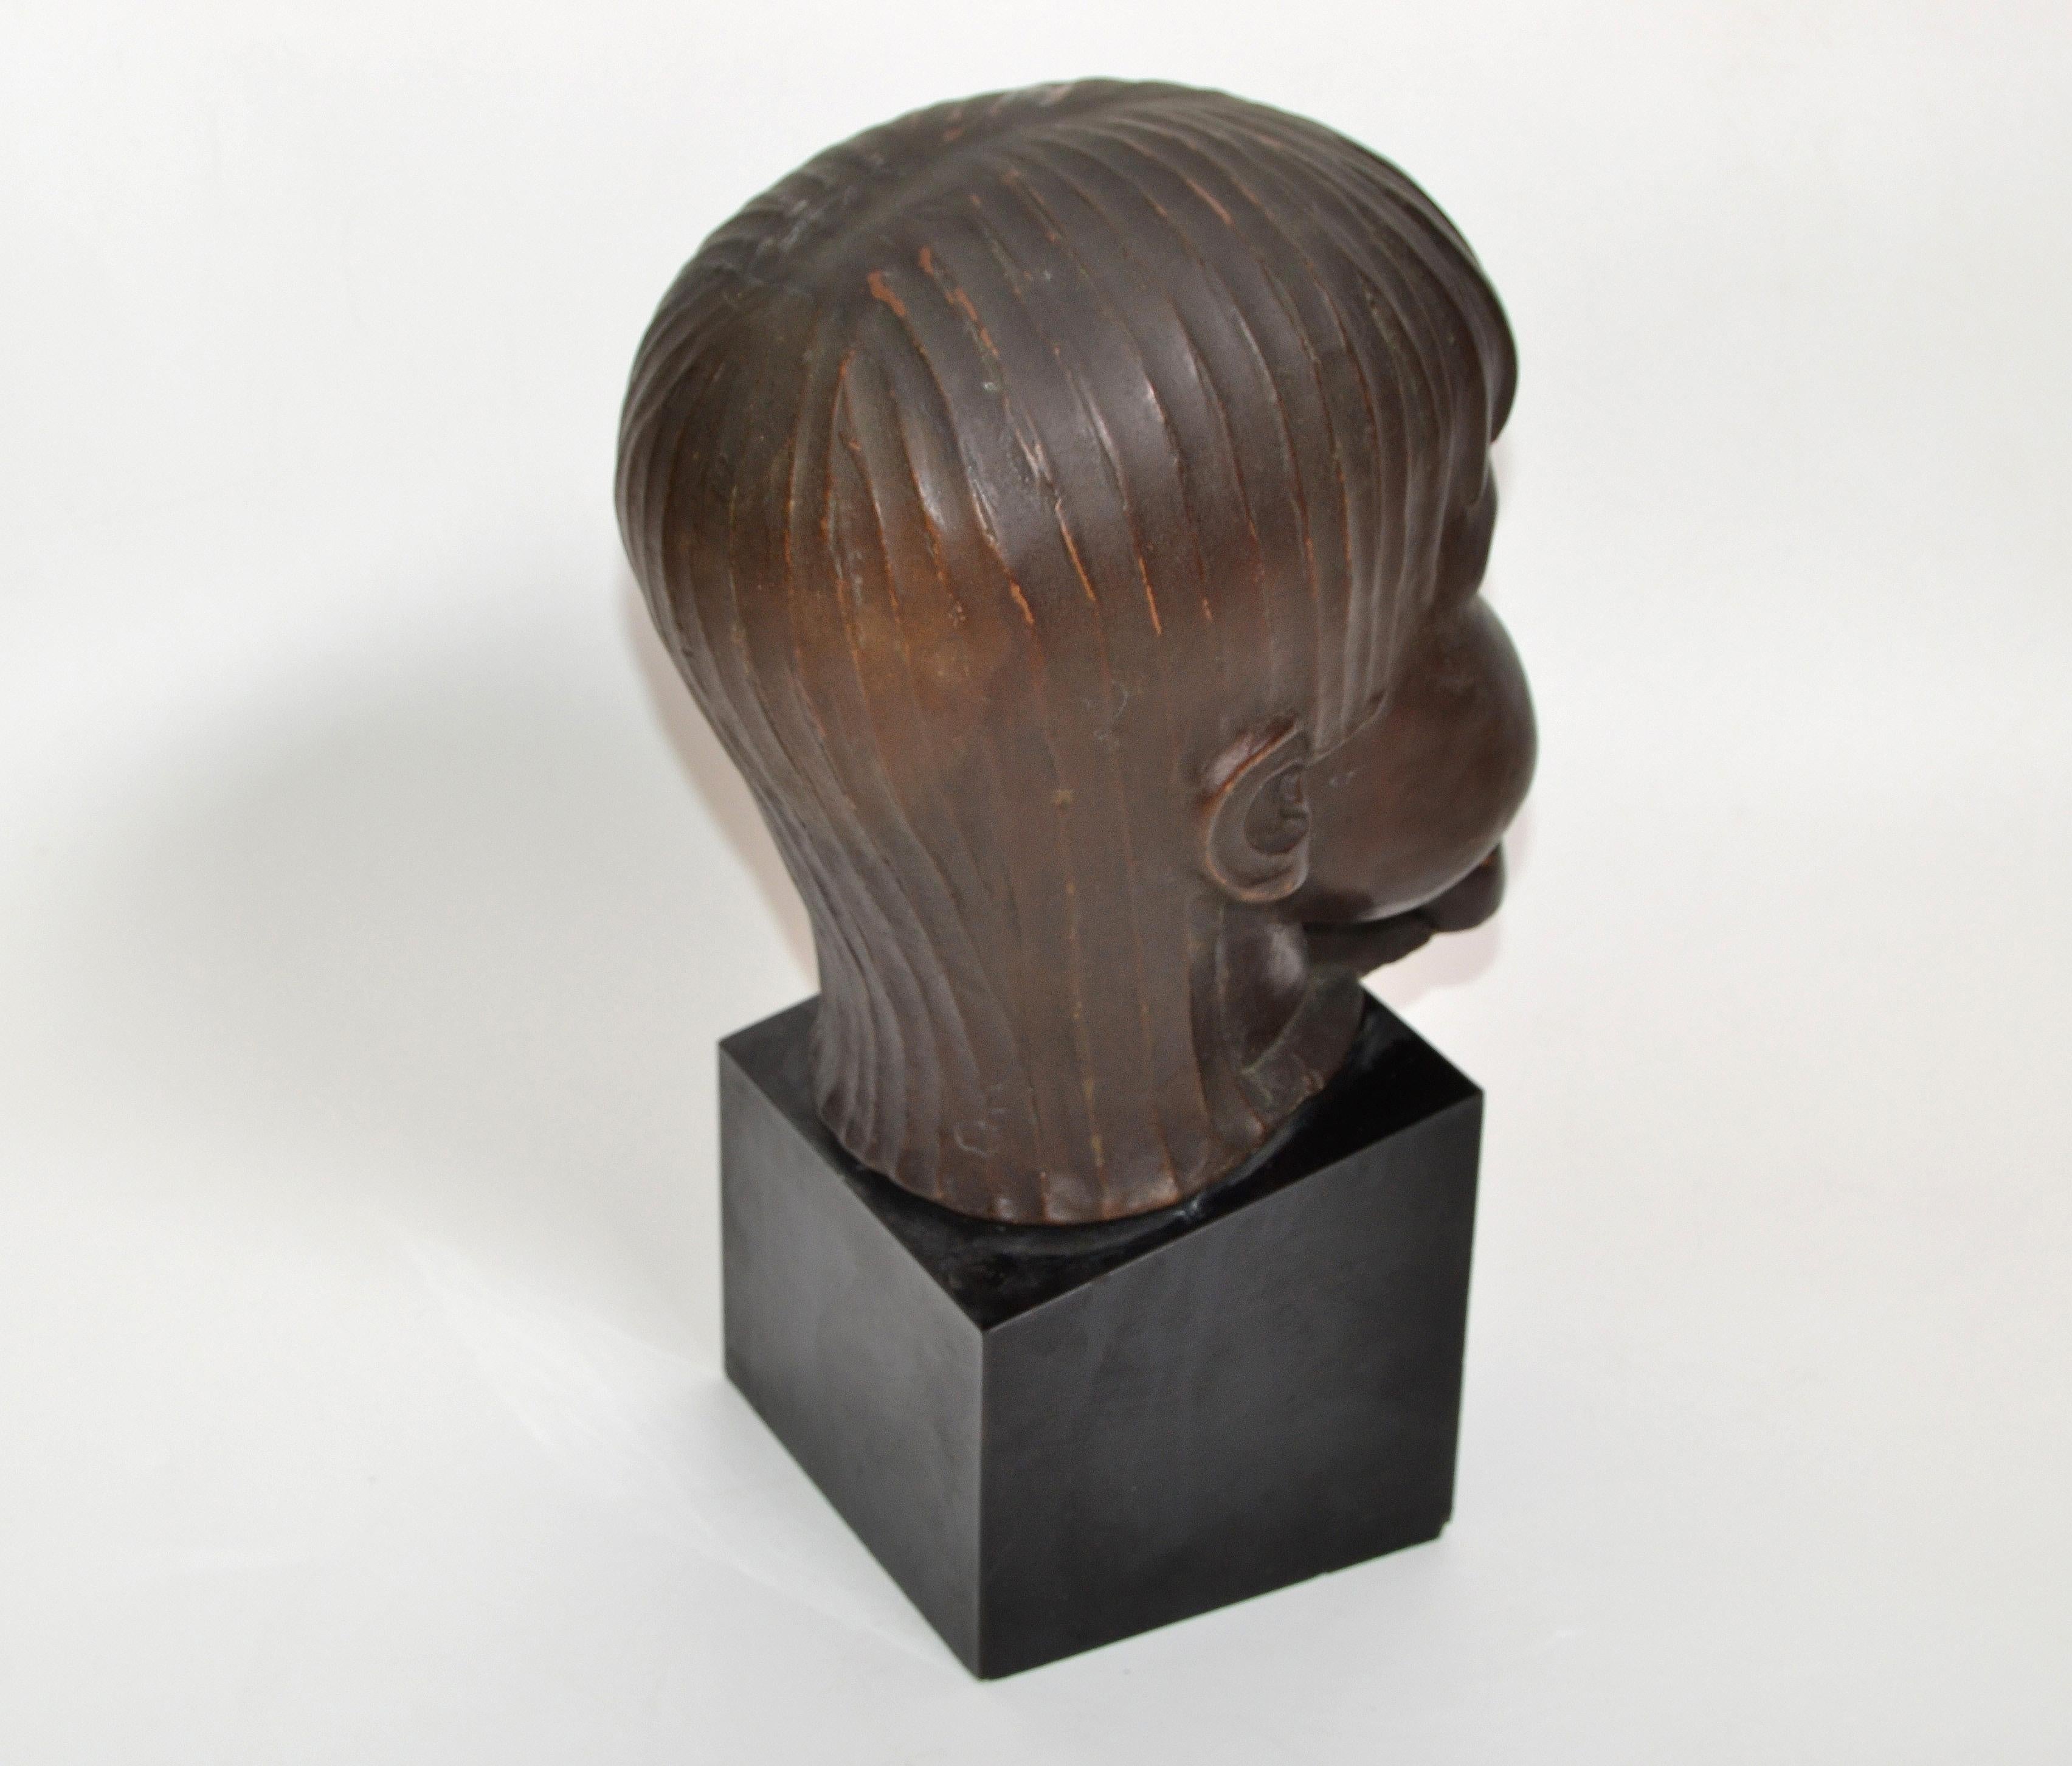 Lacquered Hagenauer Manner Patina Bronze & Wood Bust, Child Head Sculpture Sucking Fingers For Sale